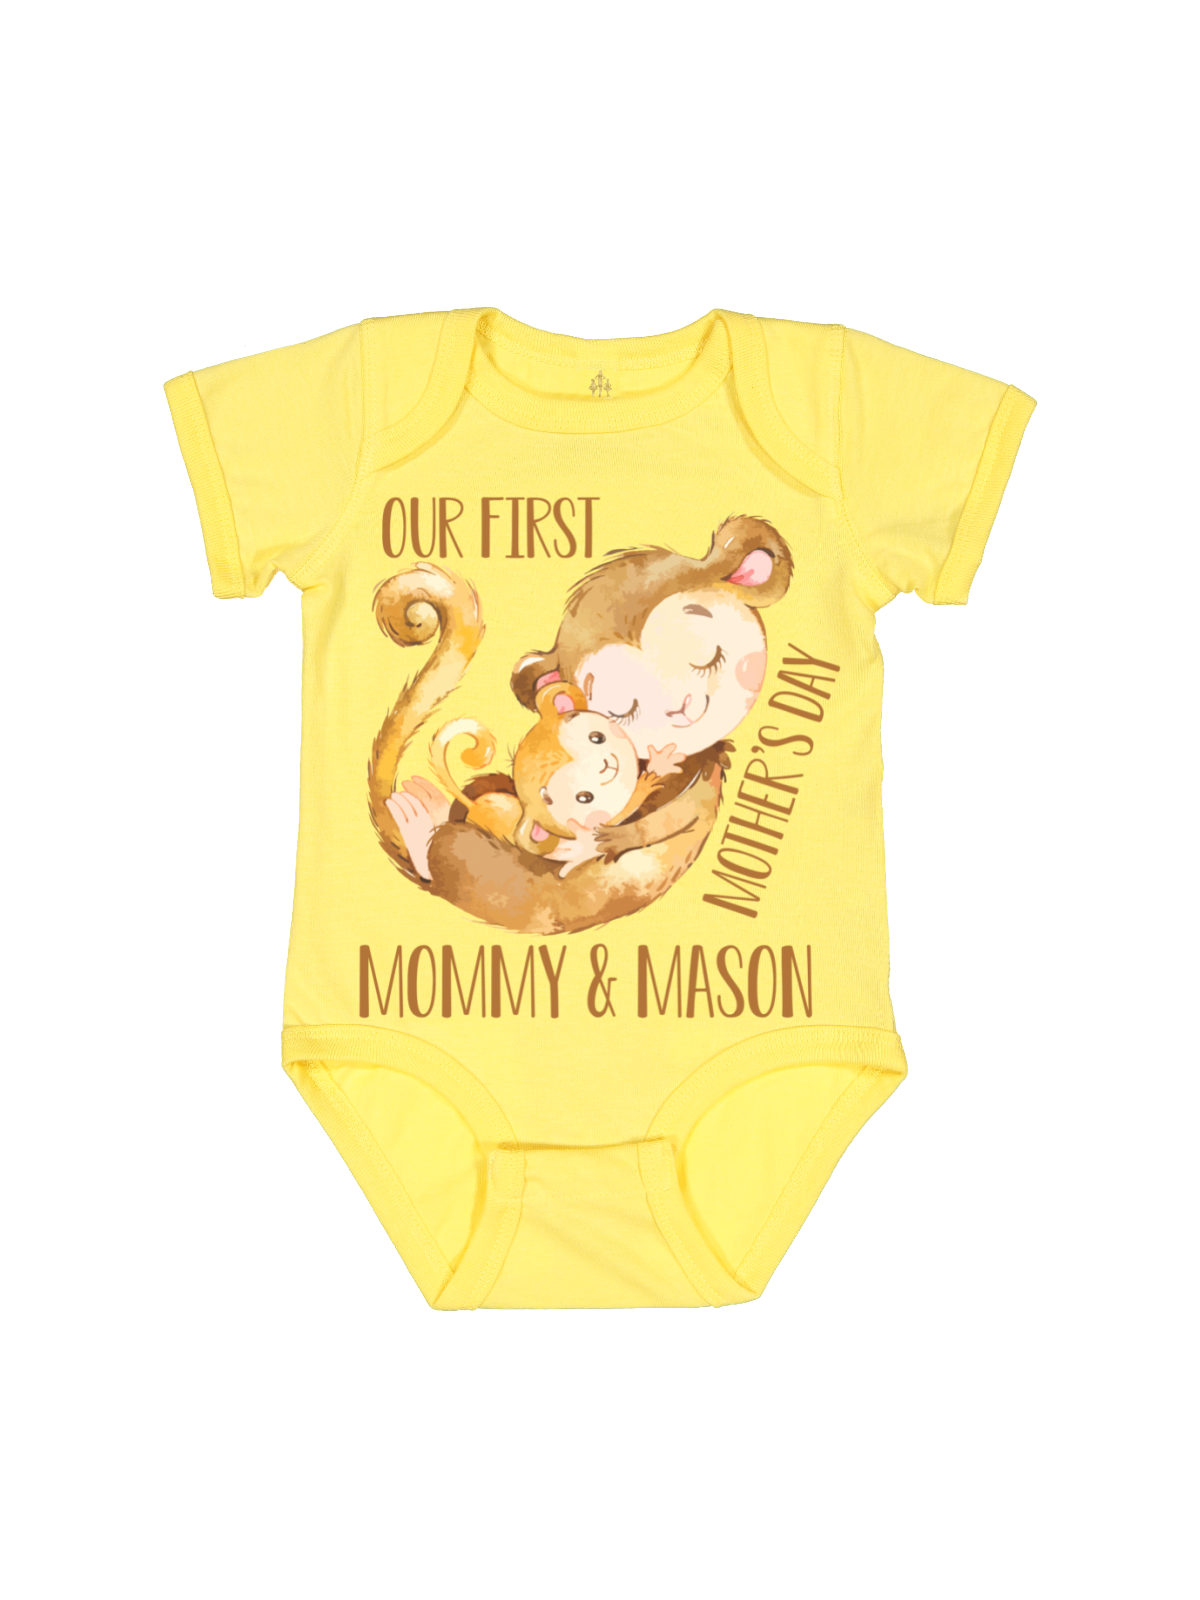 Our first Mother's Day Monkey Baby Bodysuit in Yellow